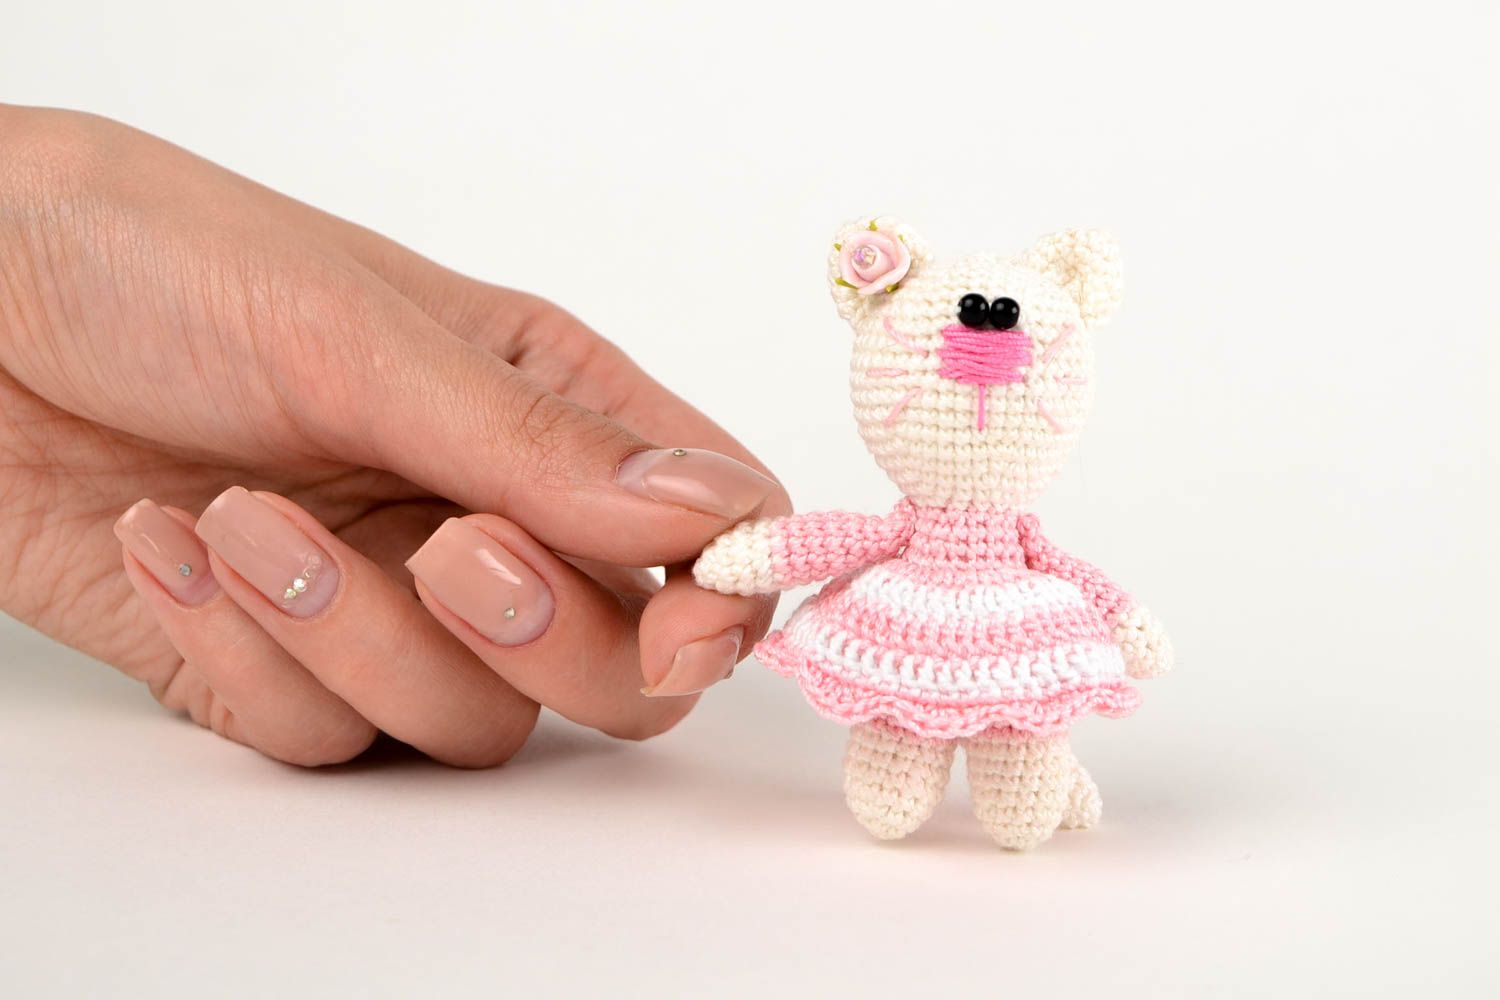 Handmade crocheted toy designer toy unusual toy for kids collectible toy photo 2